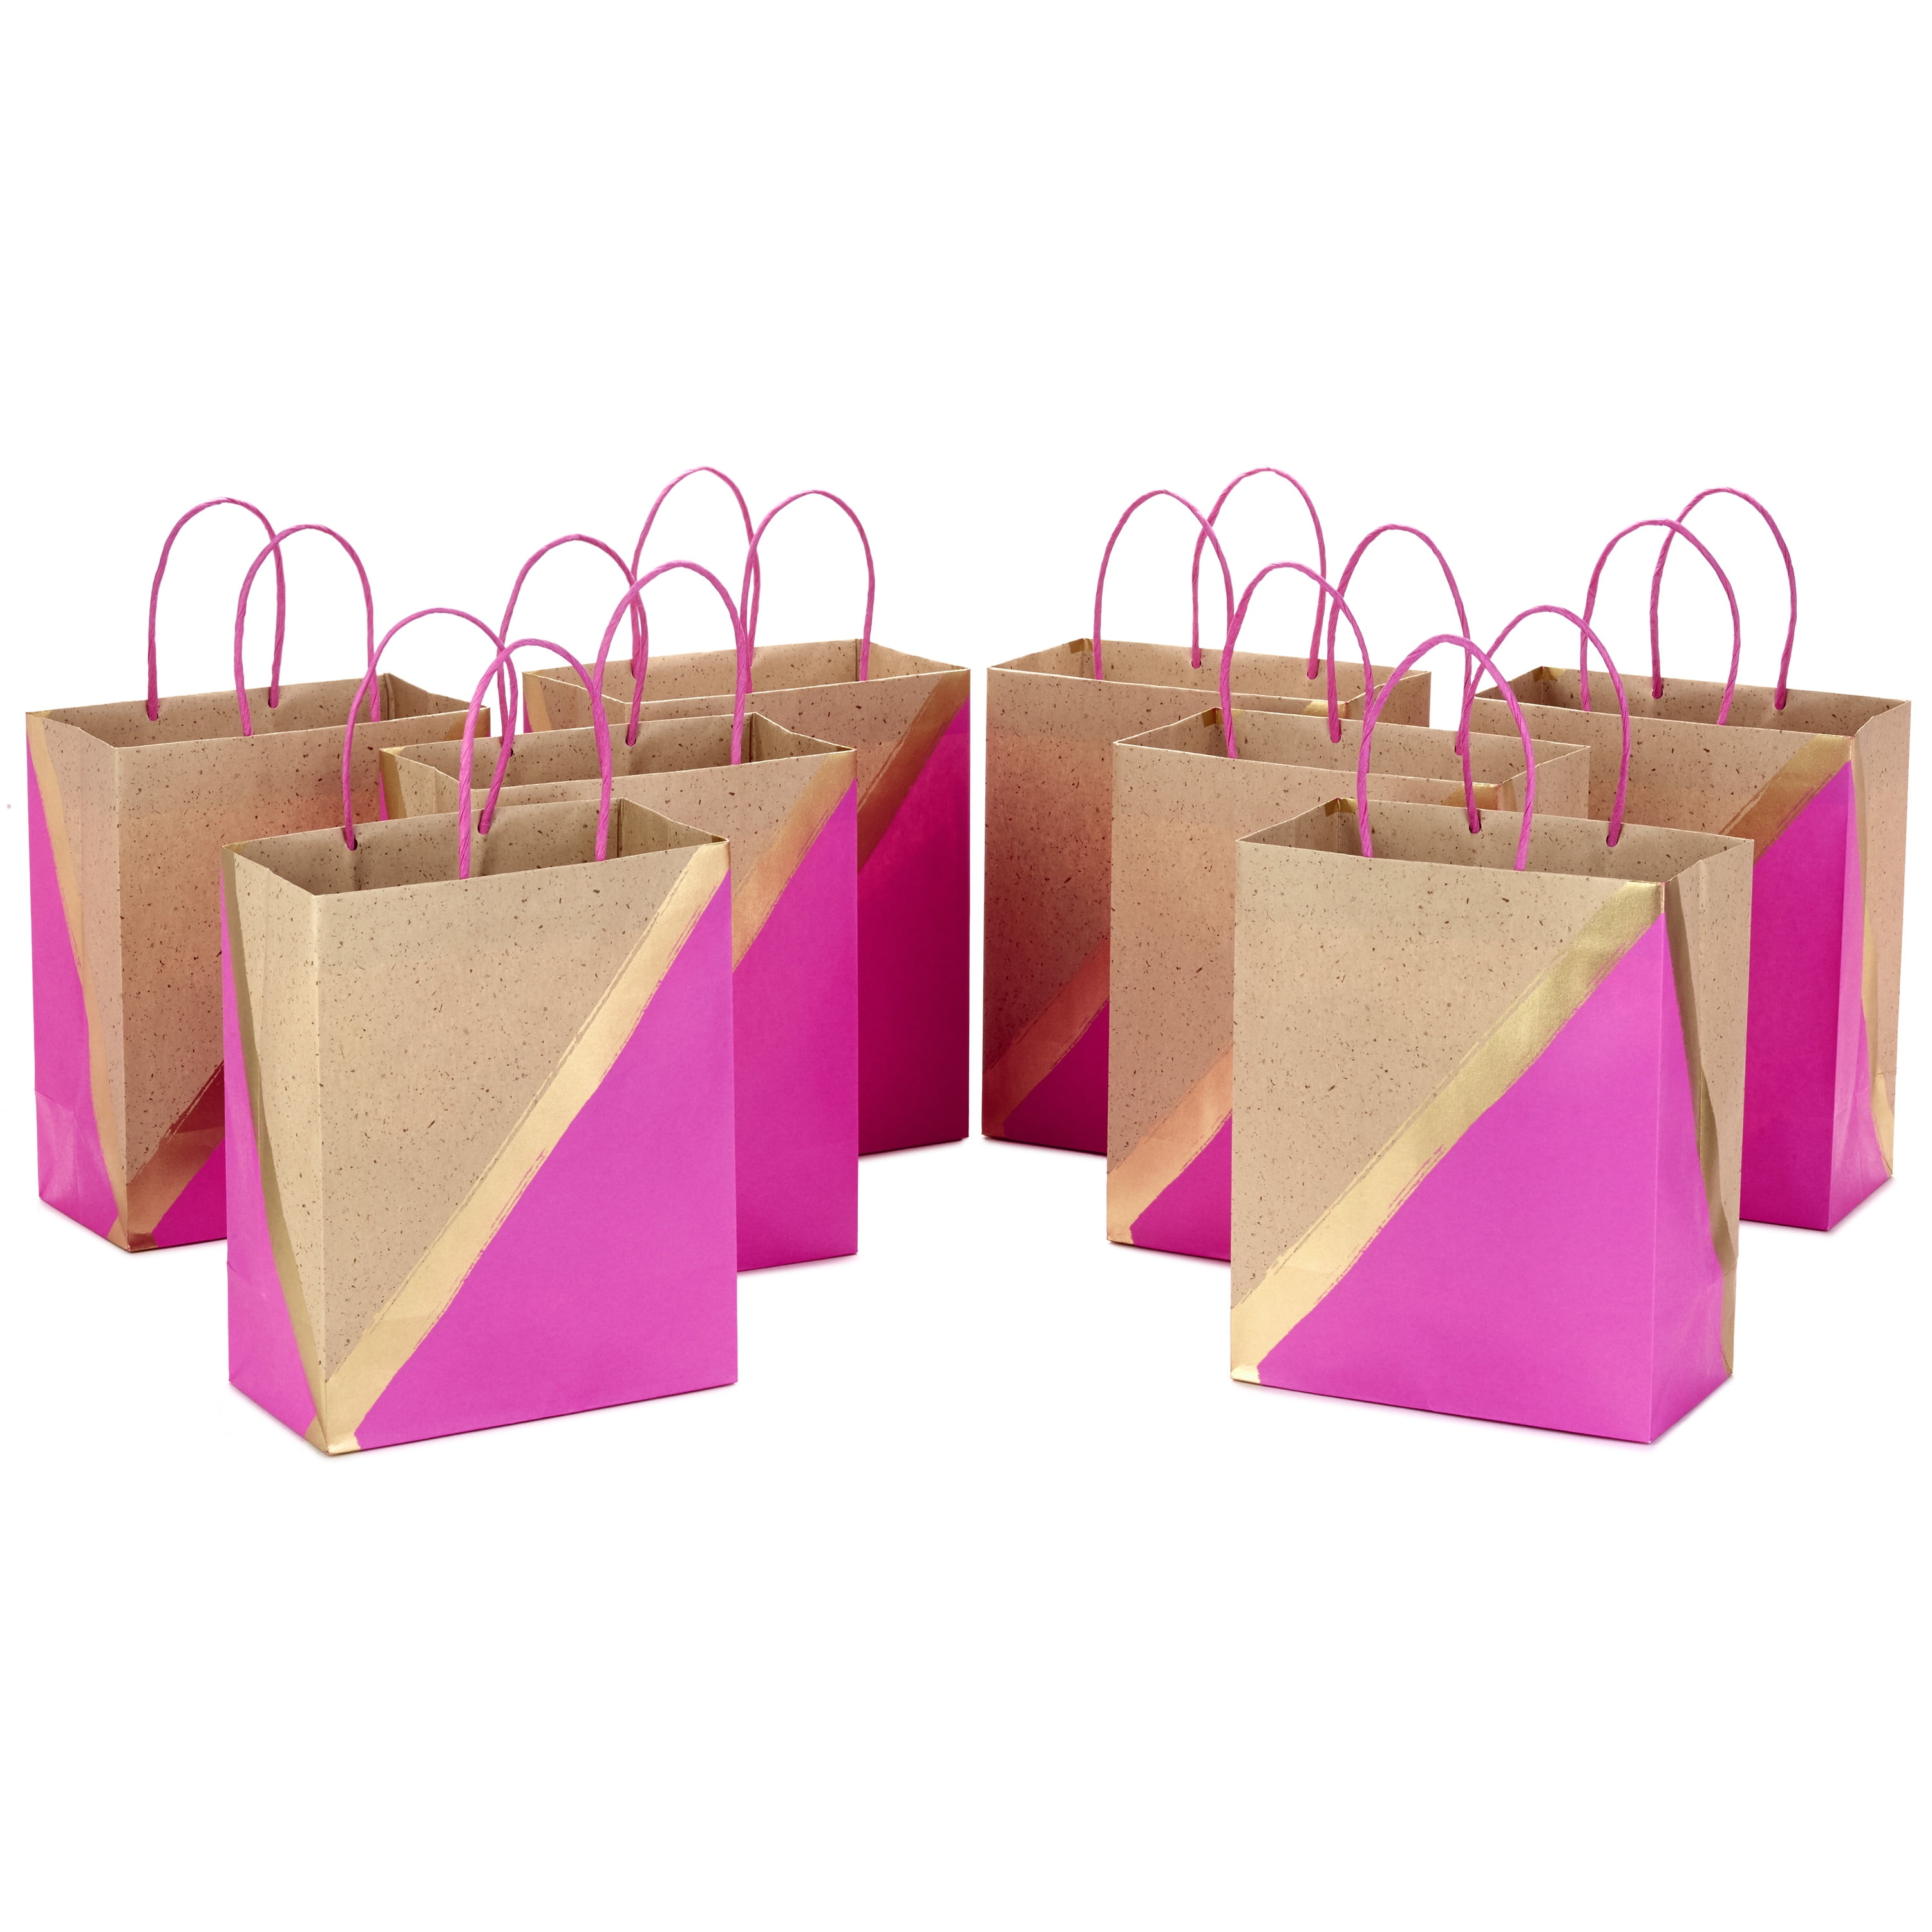 Hallmark 15 Extra Large Gift Bag with Tissue Paper - Pink Polka